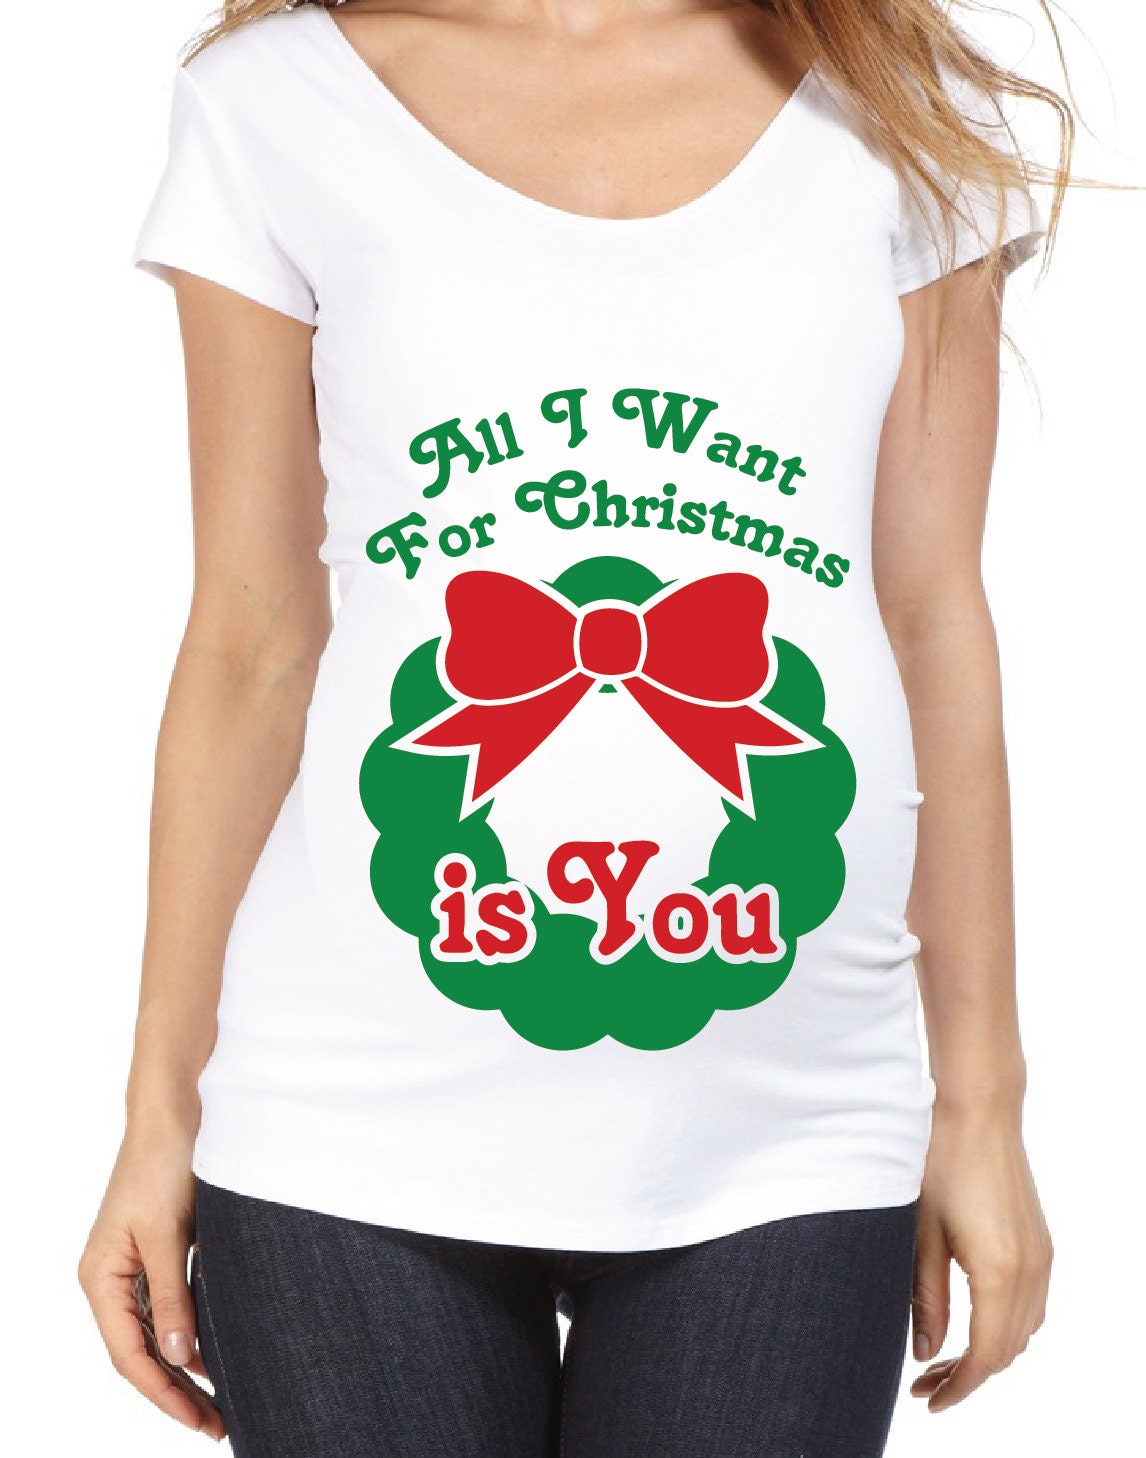 Download All I Want for Christmas Maternity Tee Shirt Design SVG DXF